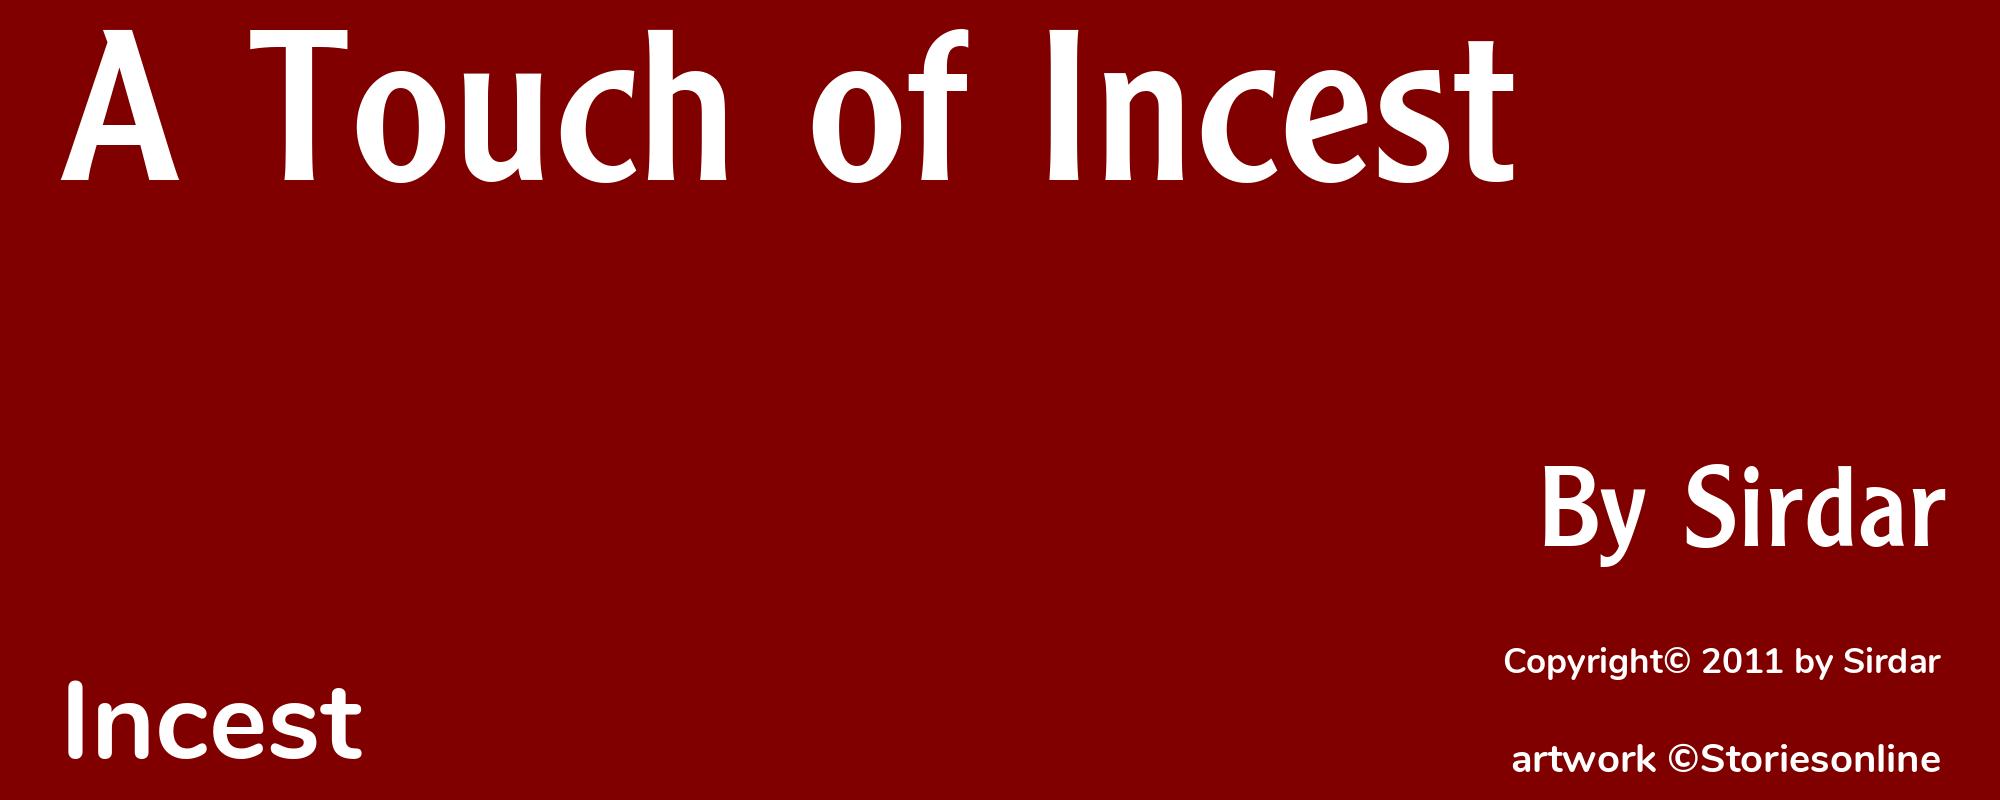 A Touch of Incest - Cover